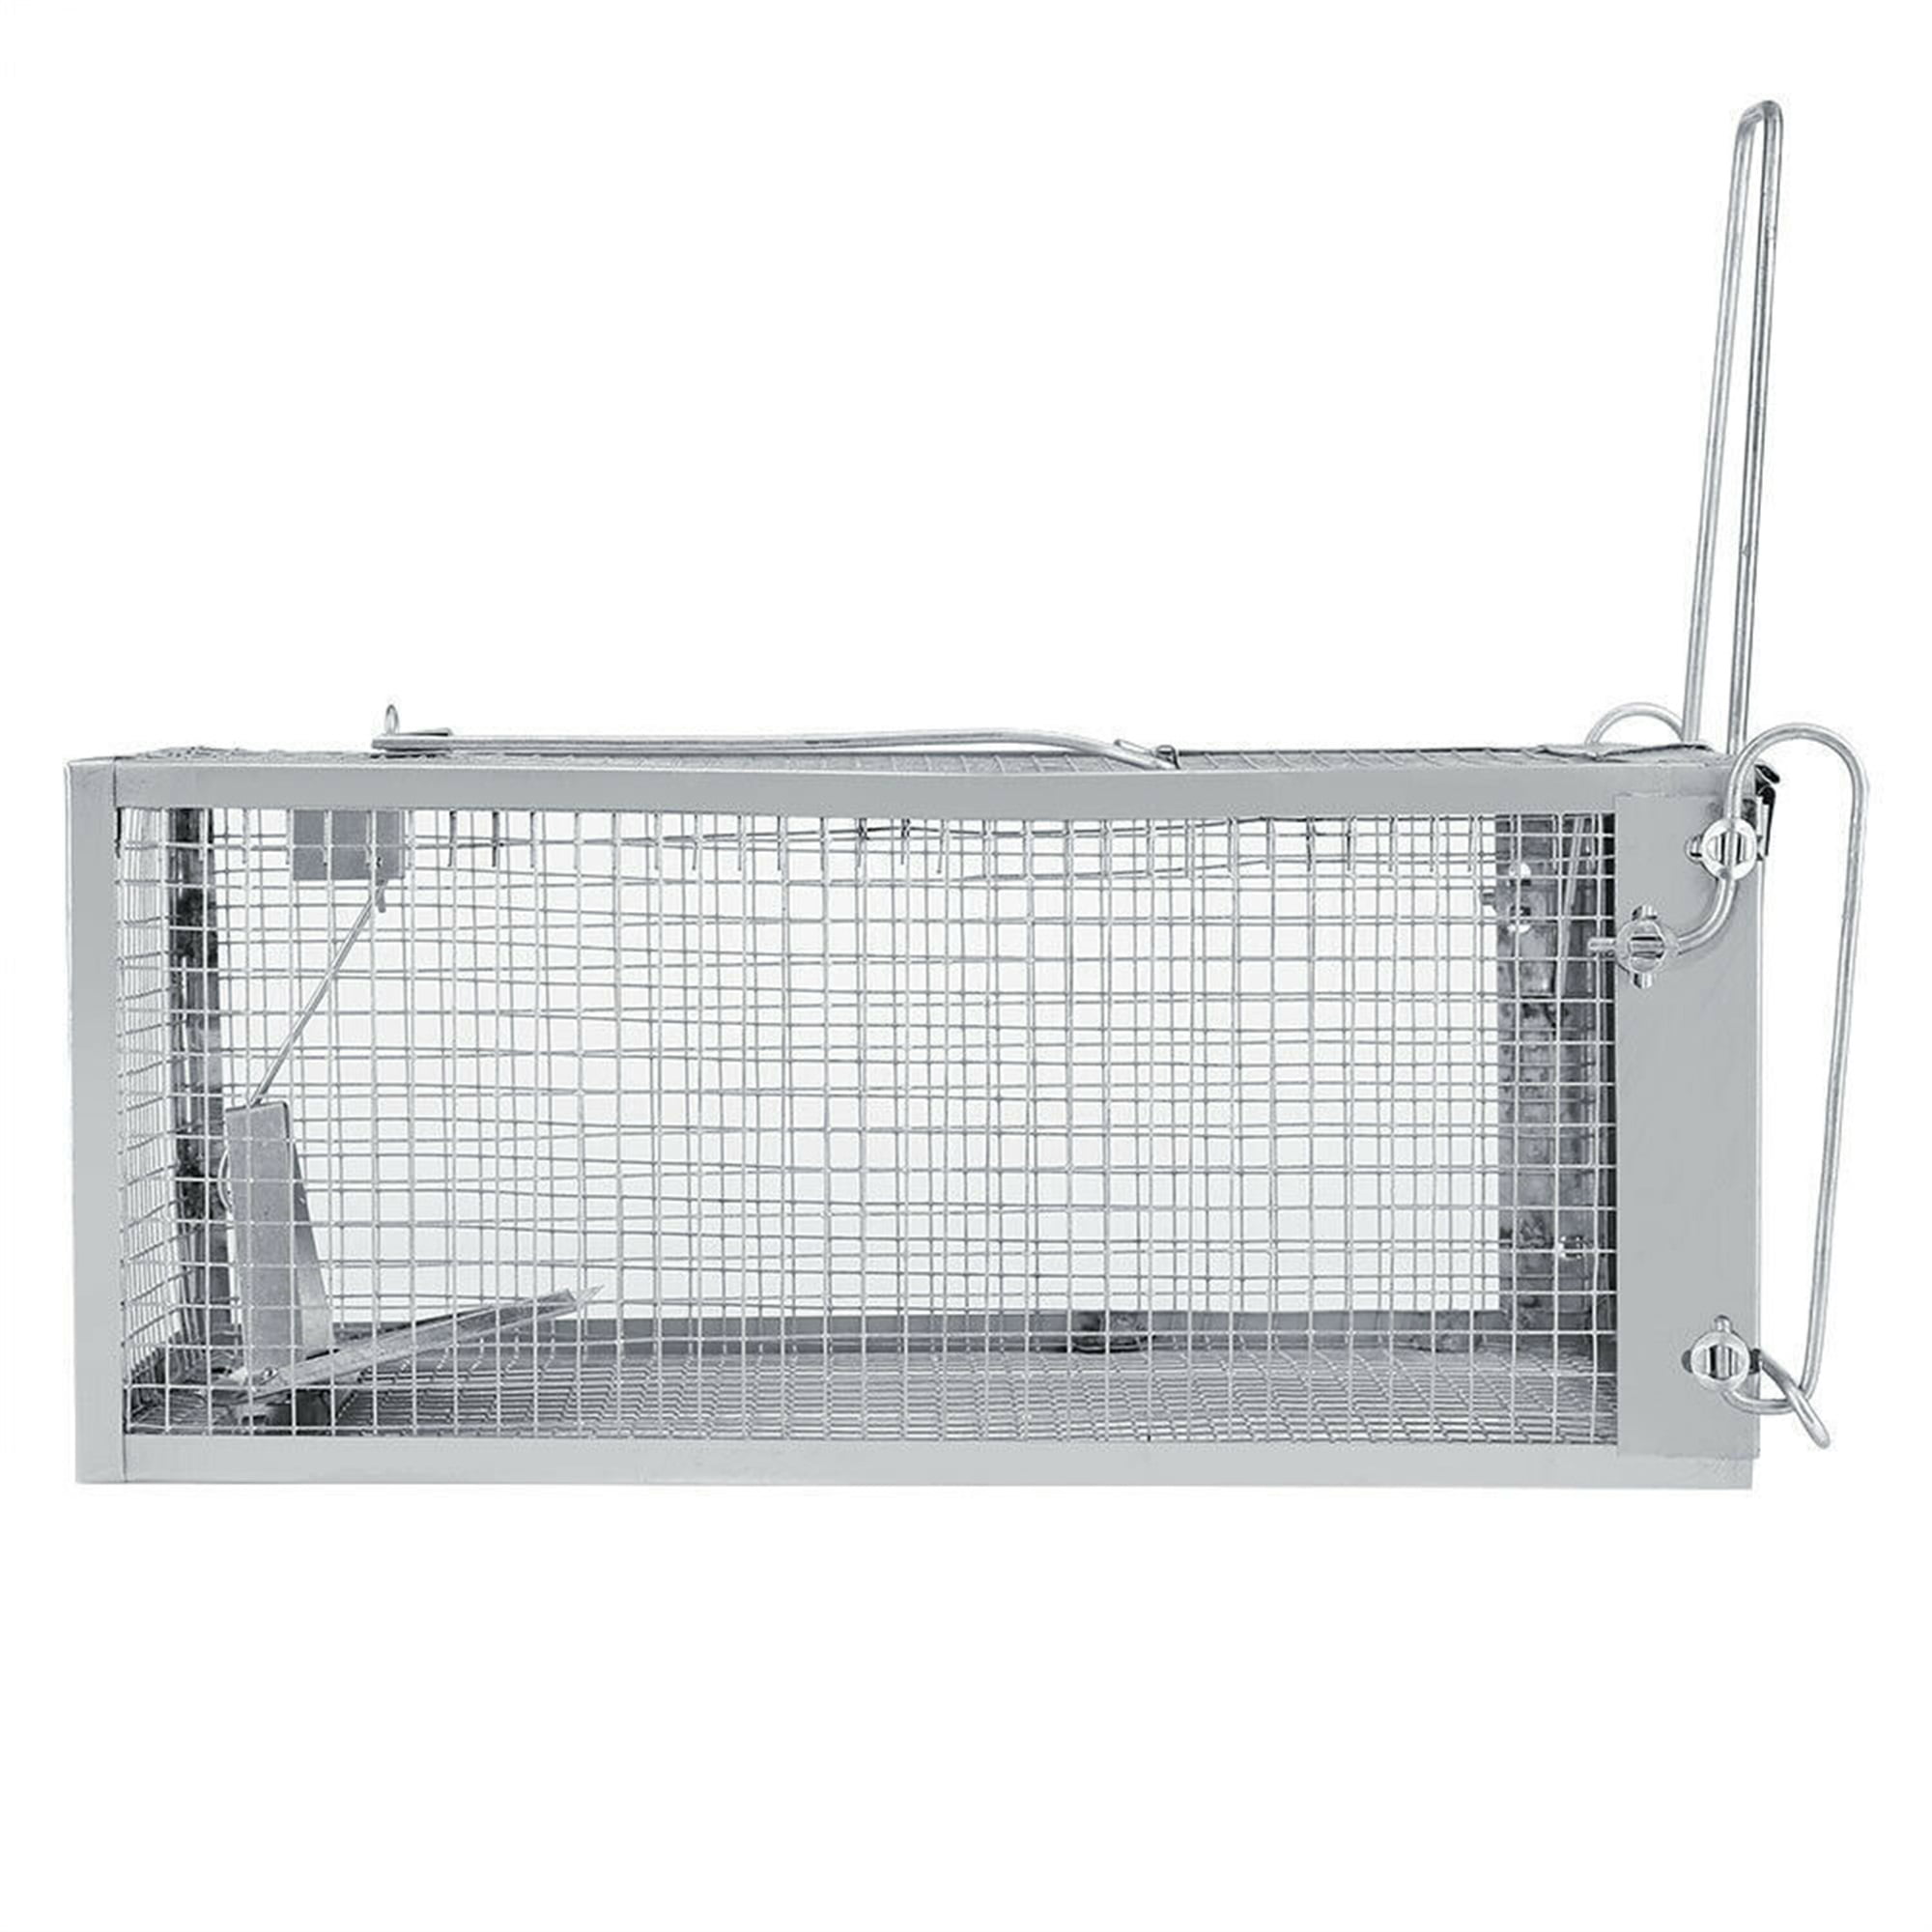 Dropship Dual Door Rat Trap Cage Humane Live Rodent Dense Mesh Trap Cage  Zinc Electroplating Mice Mouse Control Bait Catch With 2 Detachable U  Shaped Rod to Sell Online at a Lower